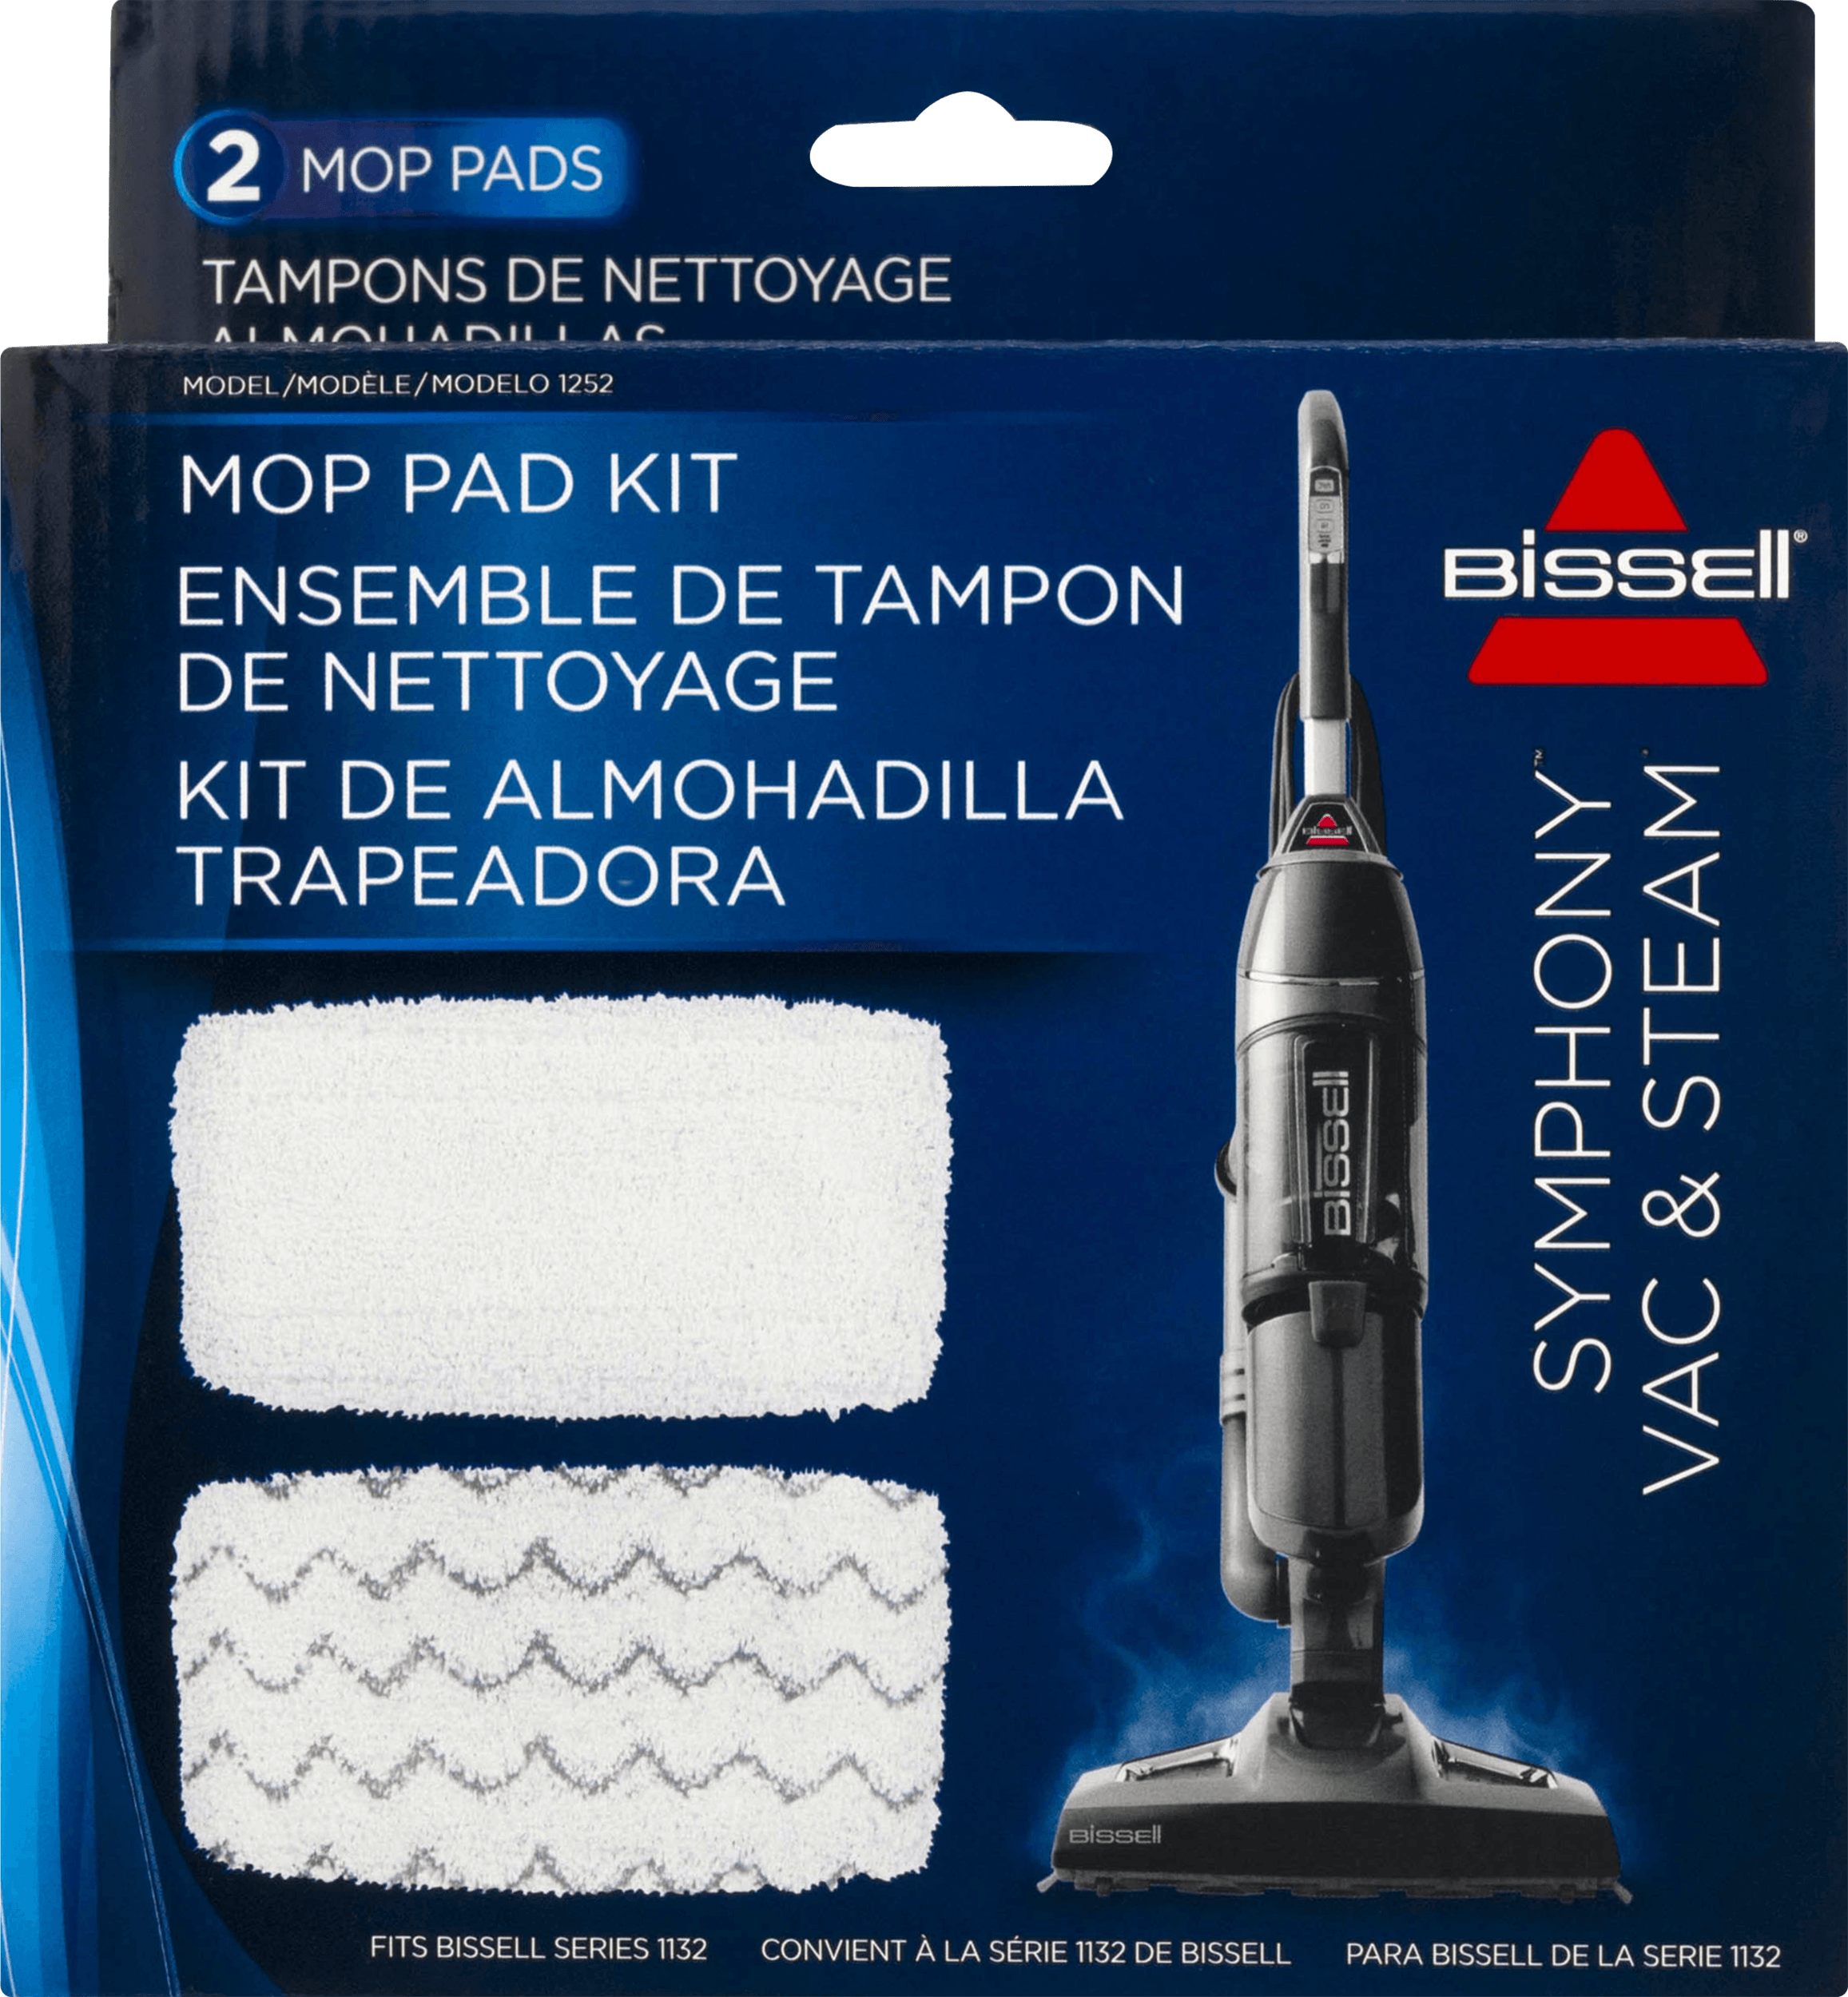 BISSELL Symphony Mop Pad Replacement Kit, 1252 - image 4 of 7